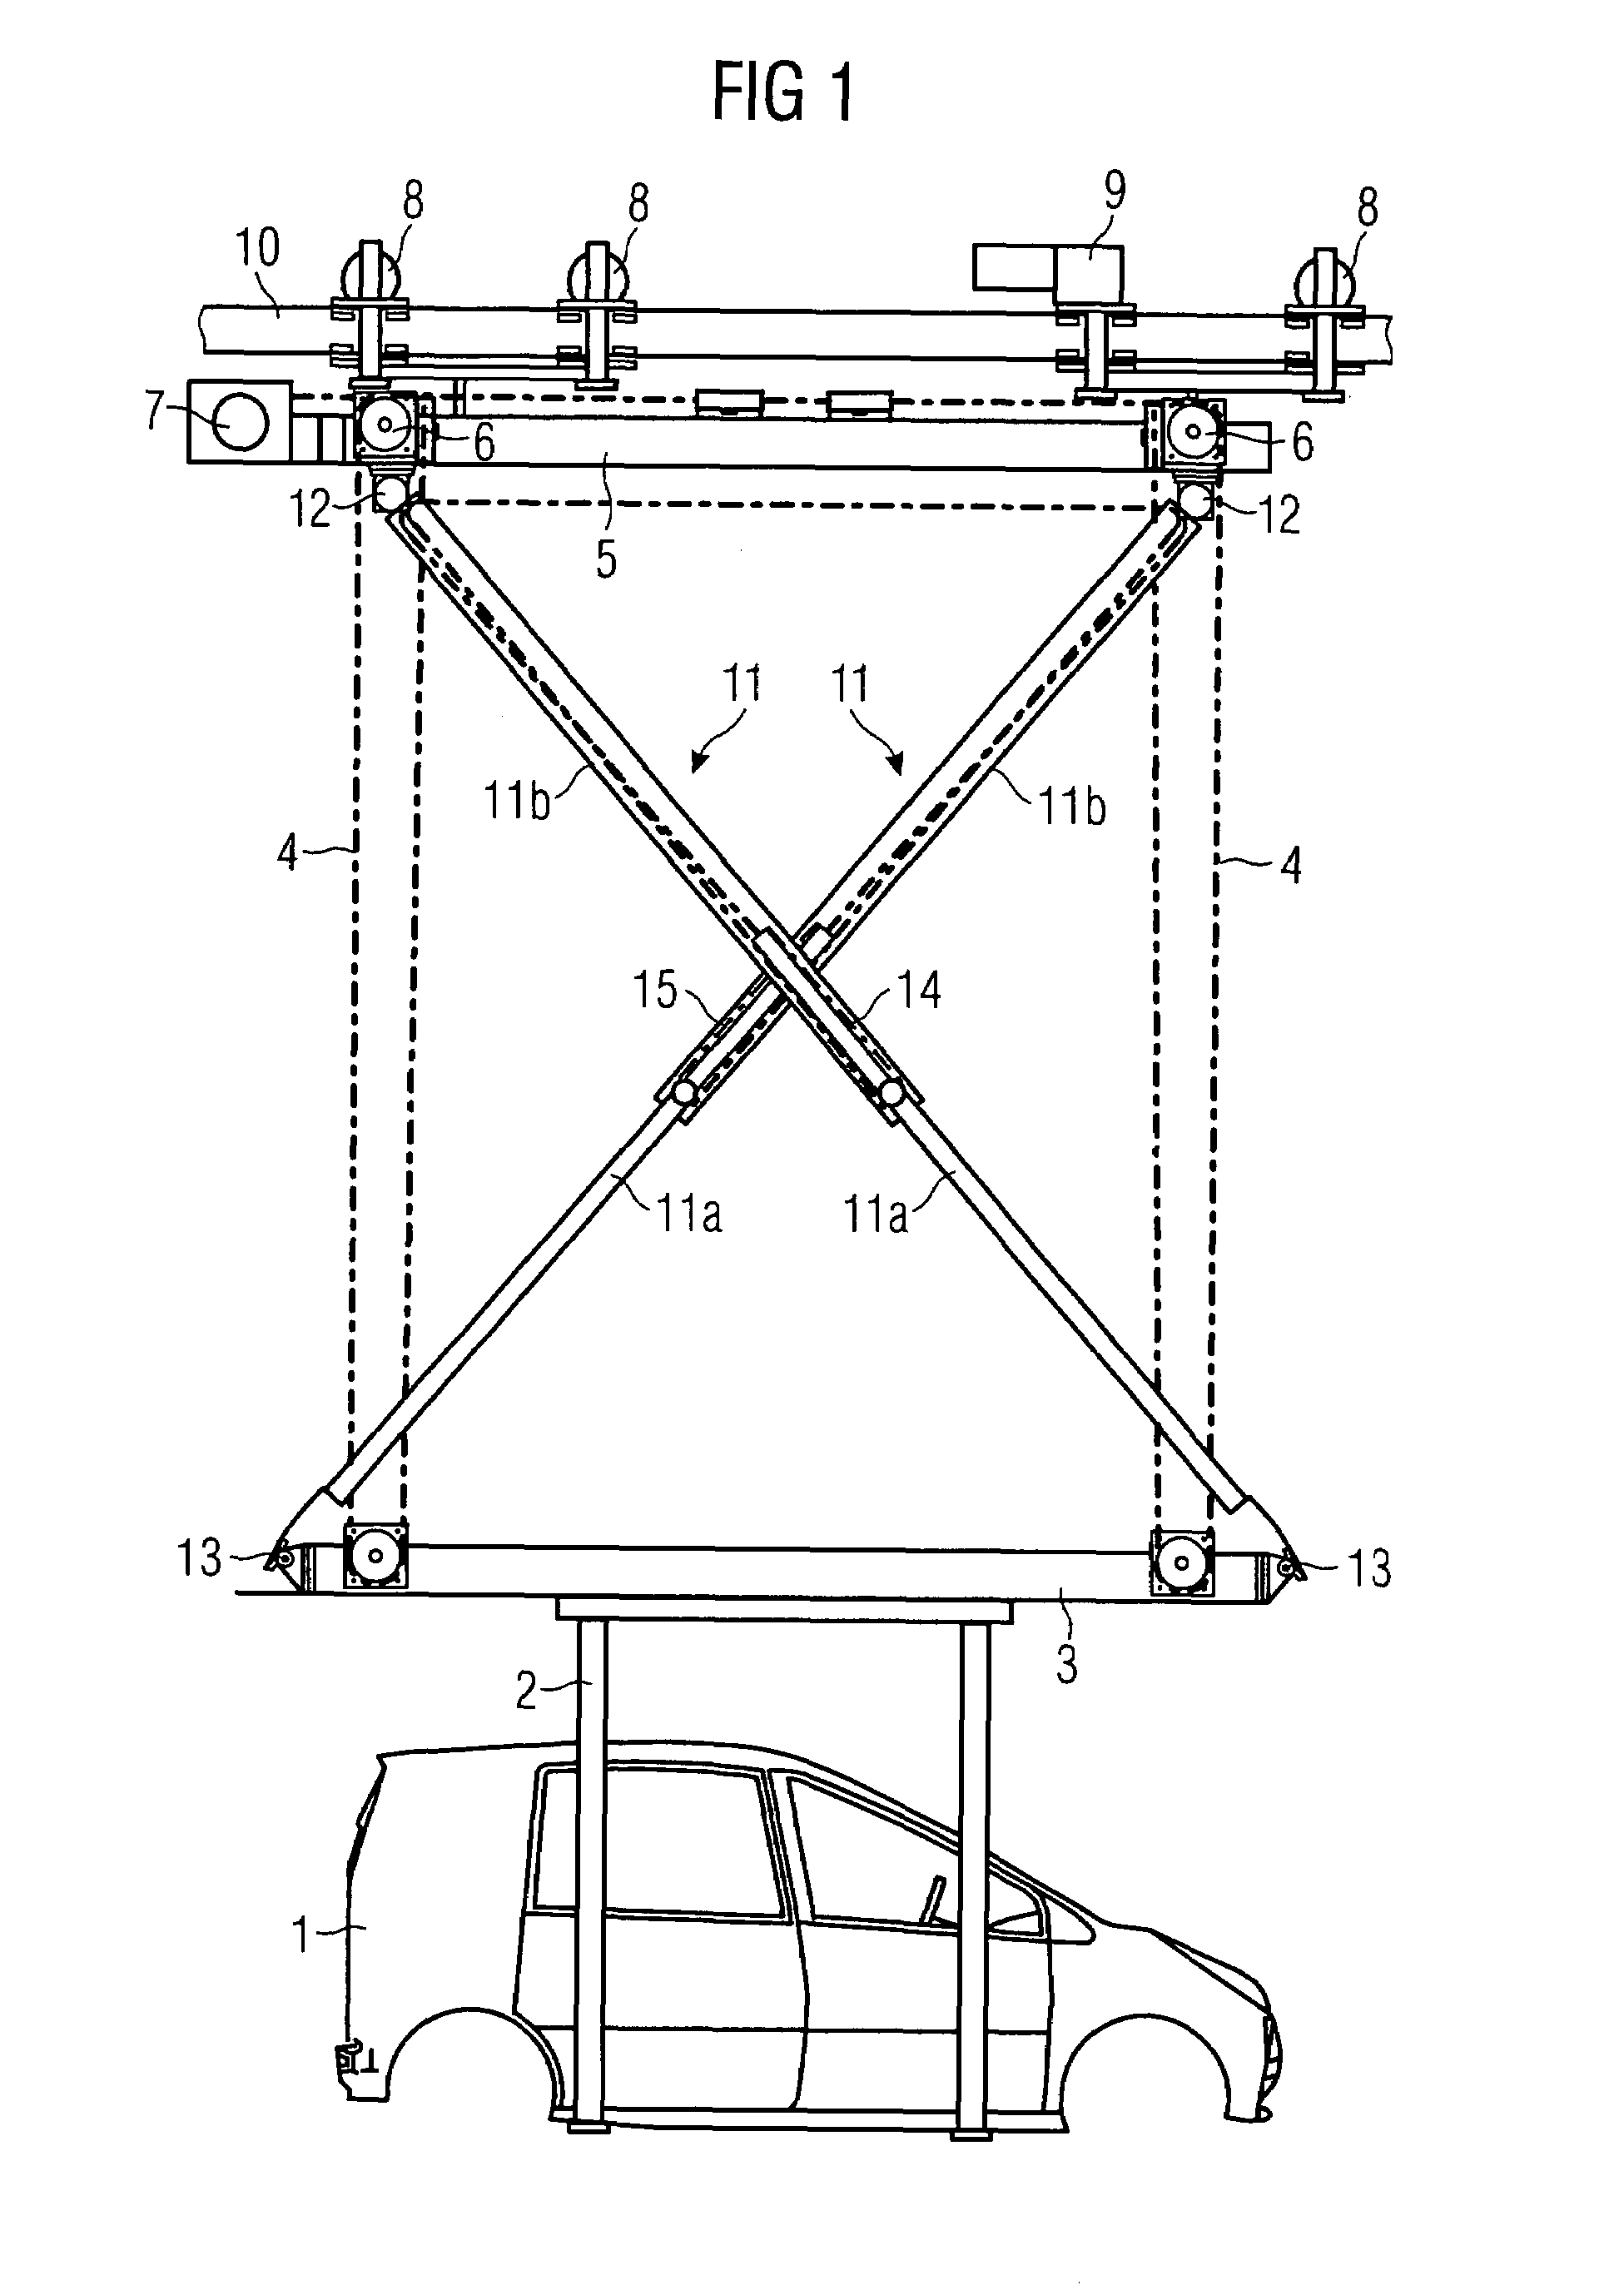 Device for lifting and stabilizing loads